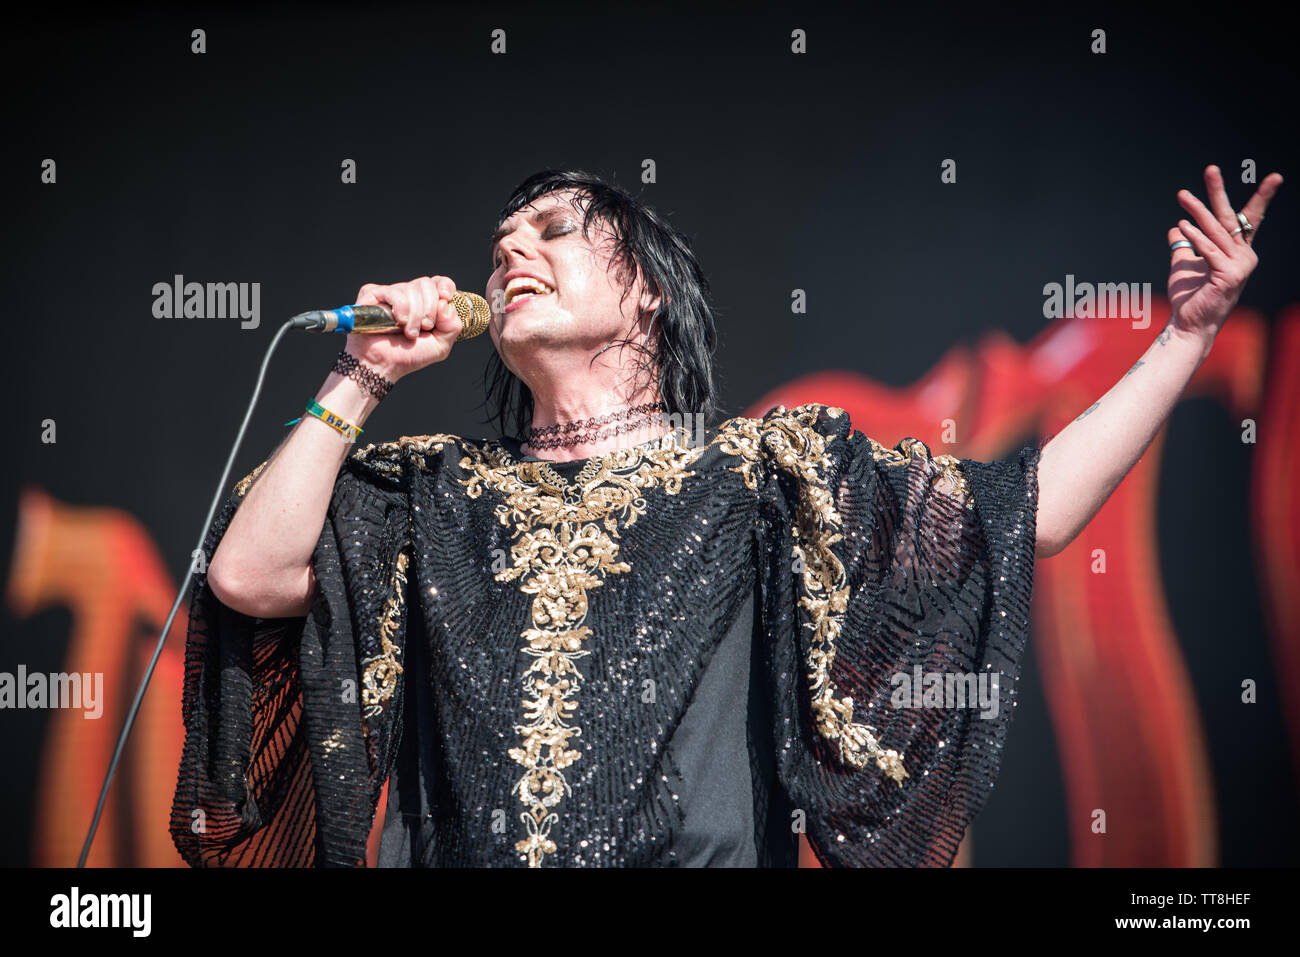 Luke Spiller, singer of the English band The Struts, performing live on stage at the Firenze Rocks festival 2019 in Florence, Italy, opening for Eddie Stock Photo